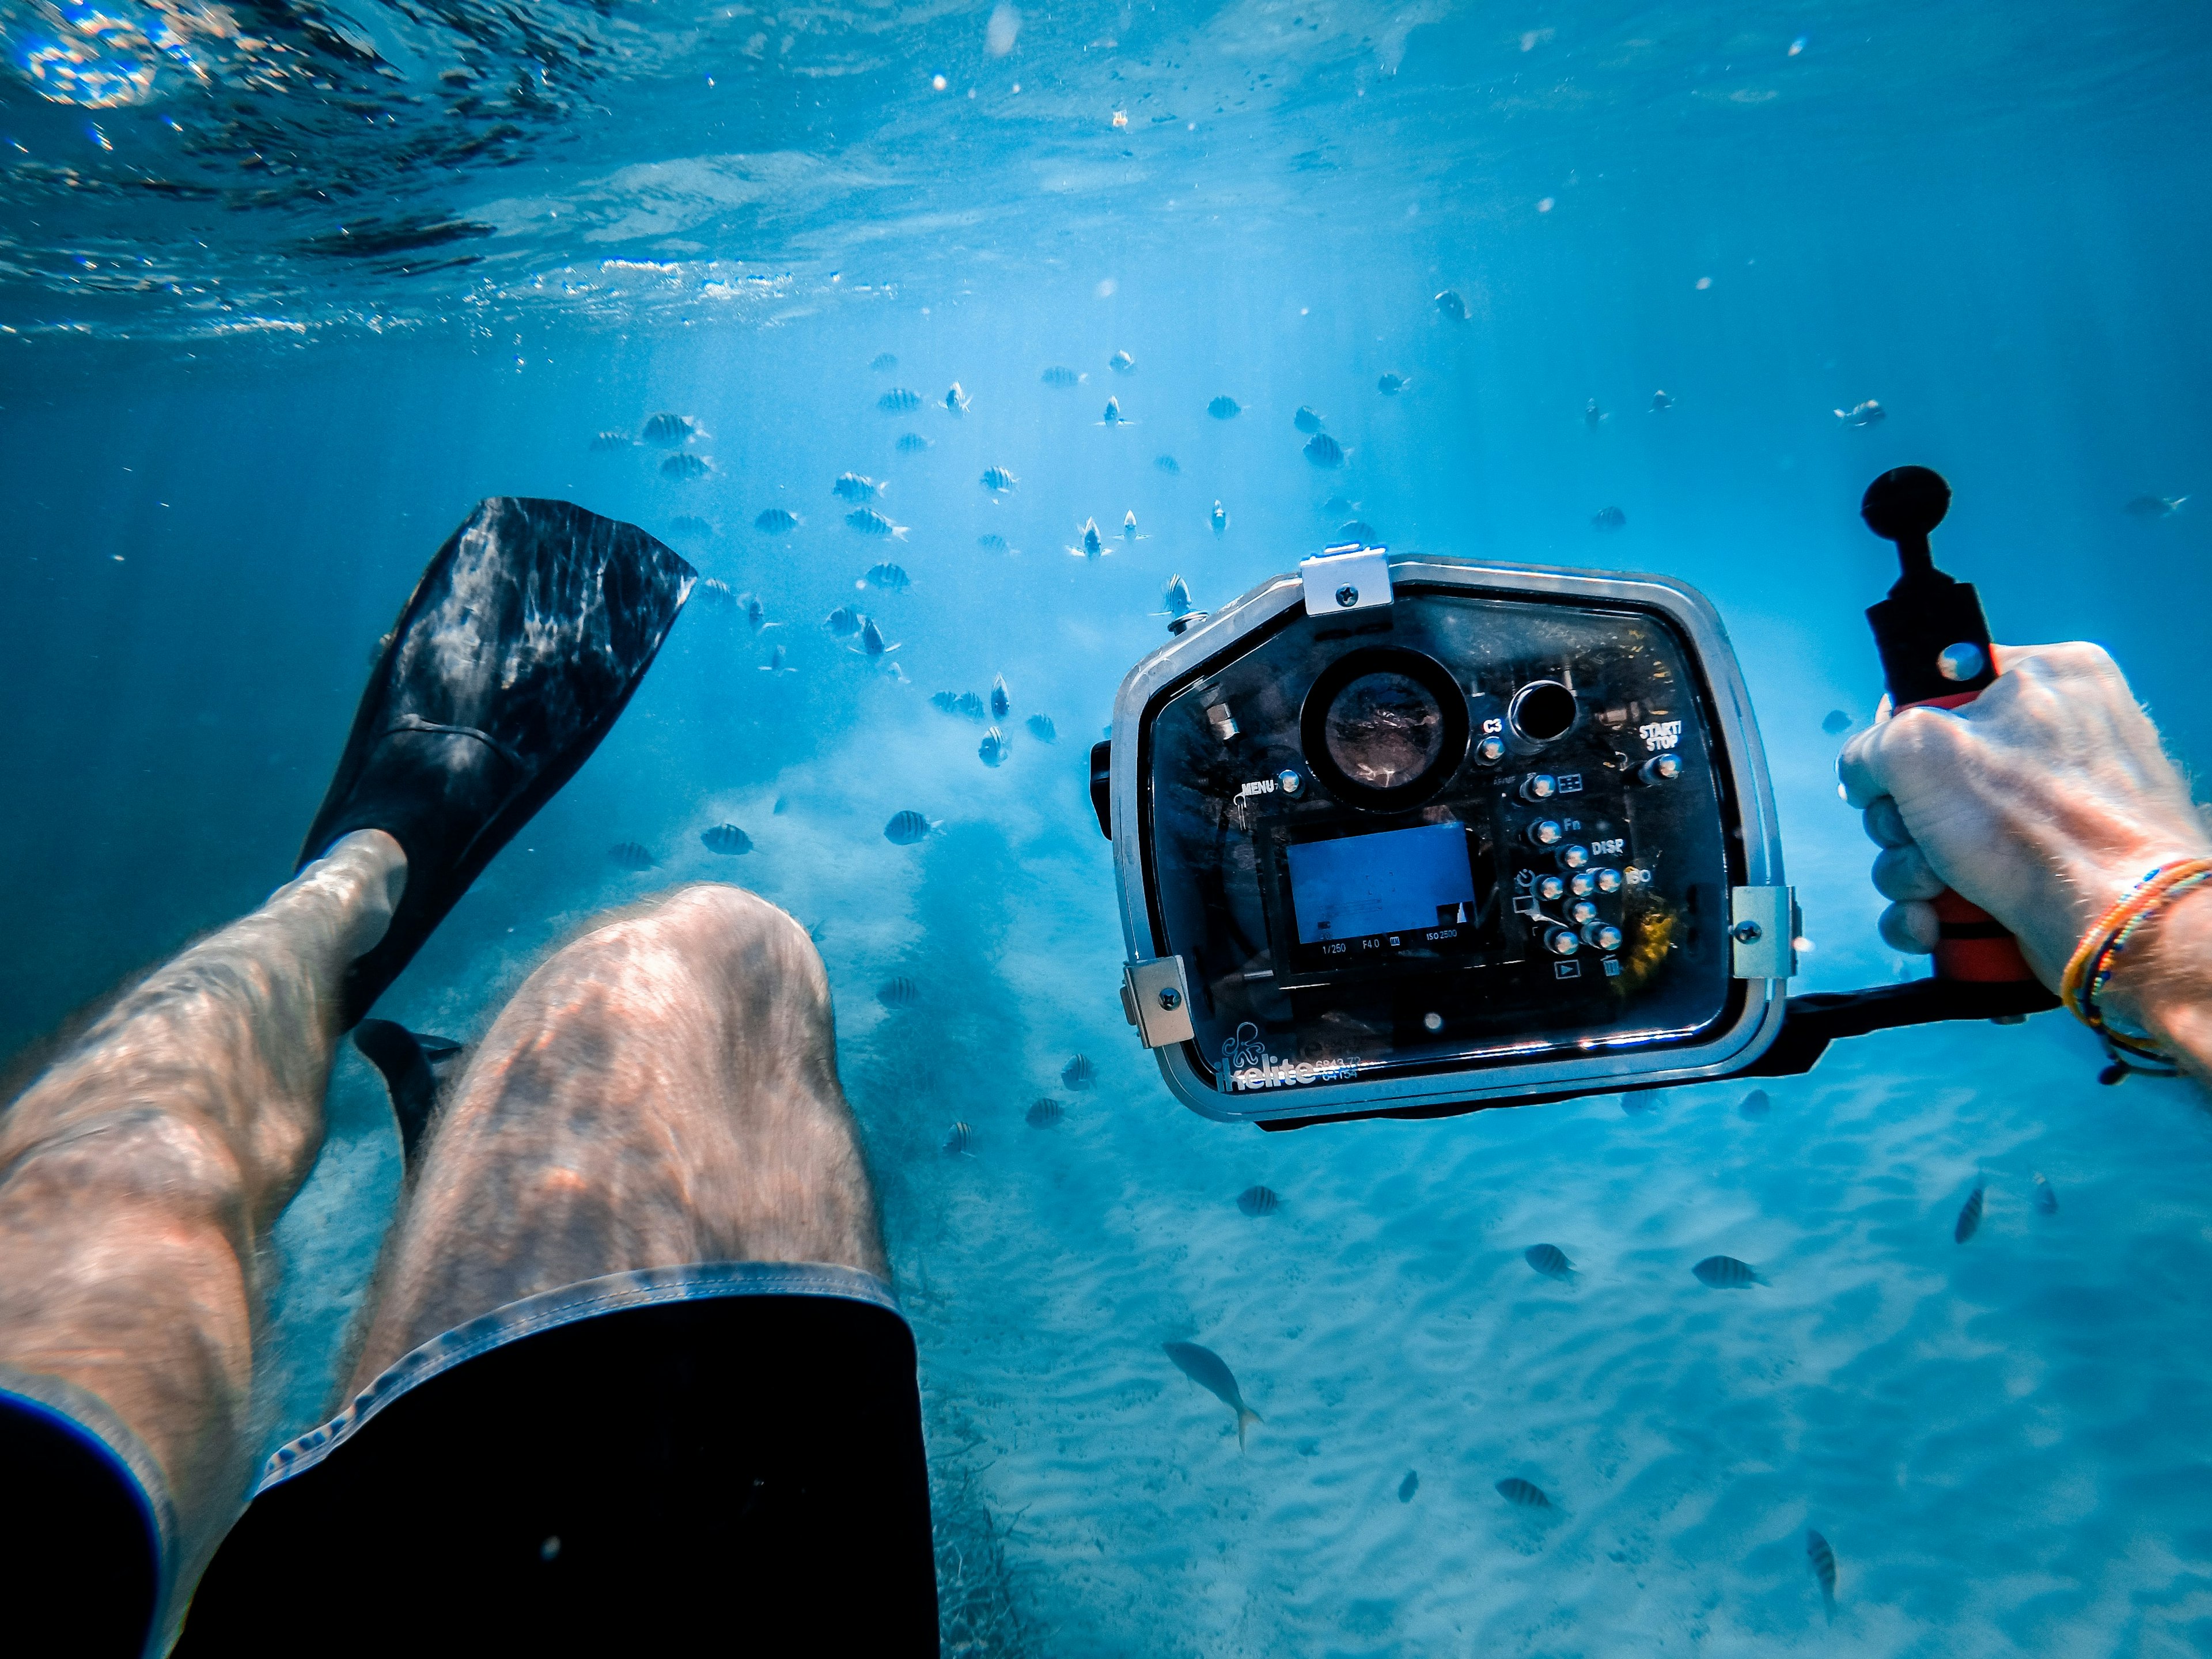 A person holding an underwater camera pointed at some fish